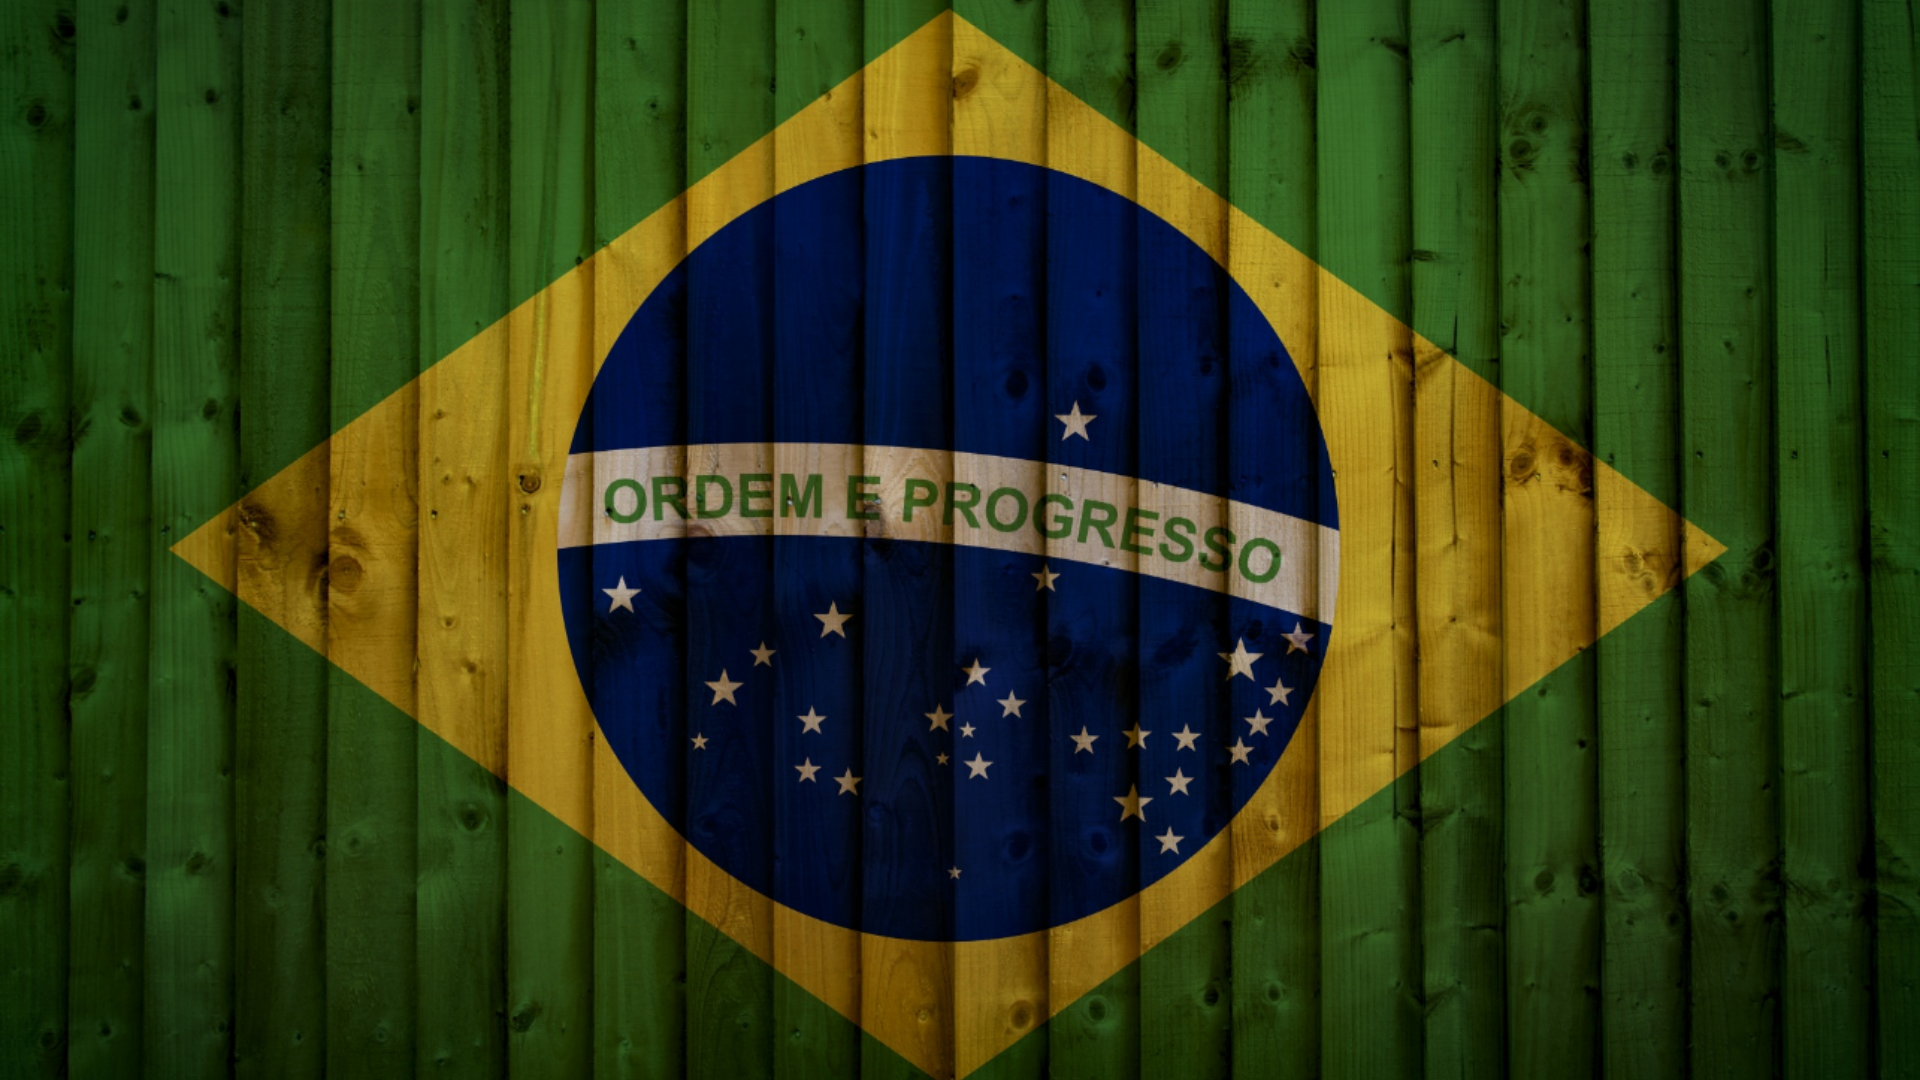 A photo of a fence with the Brazilian flag painted on